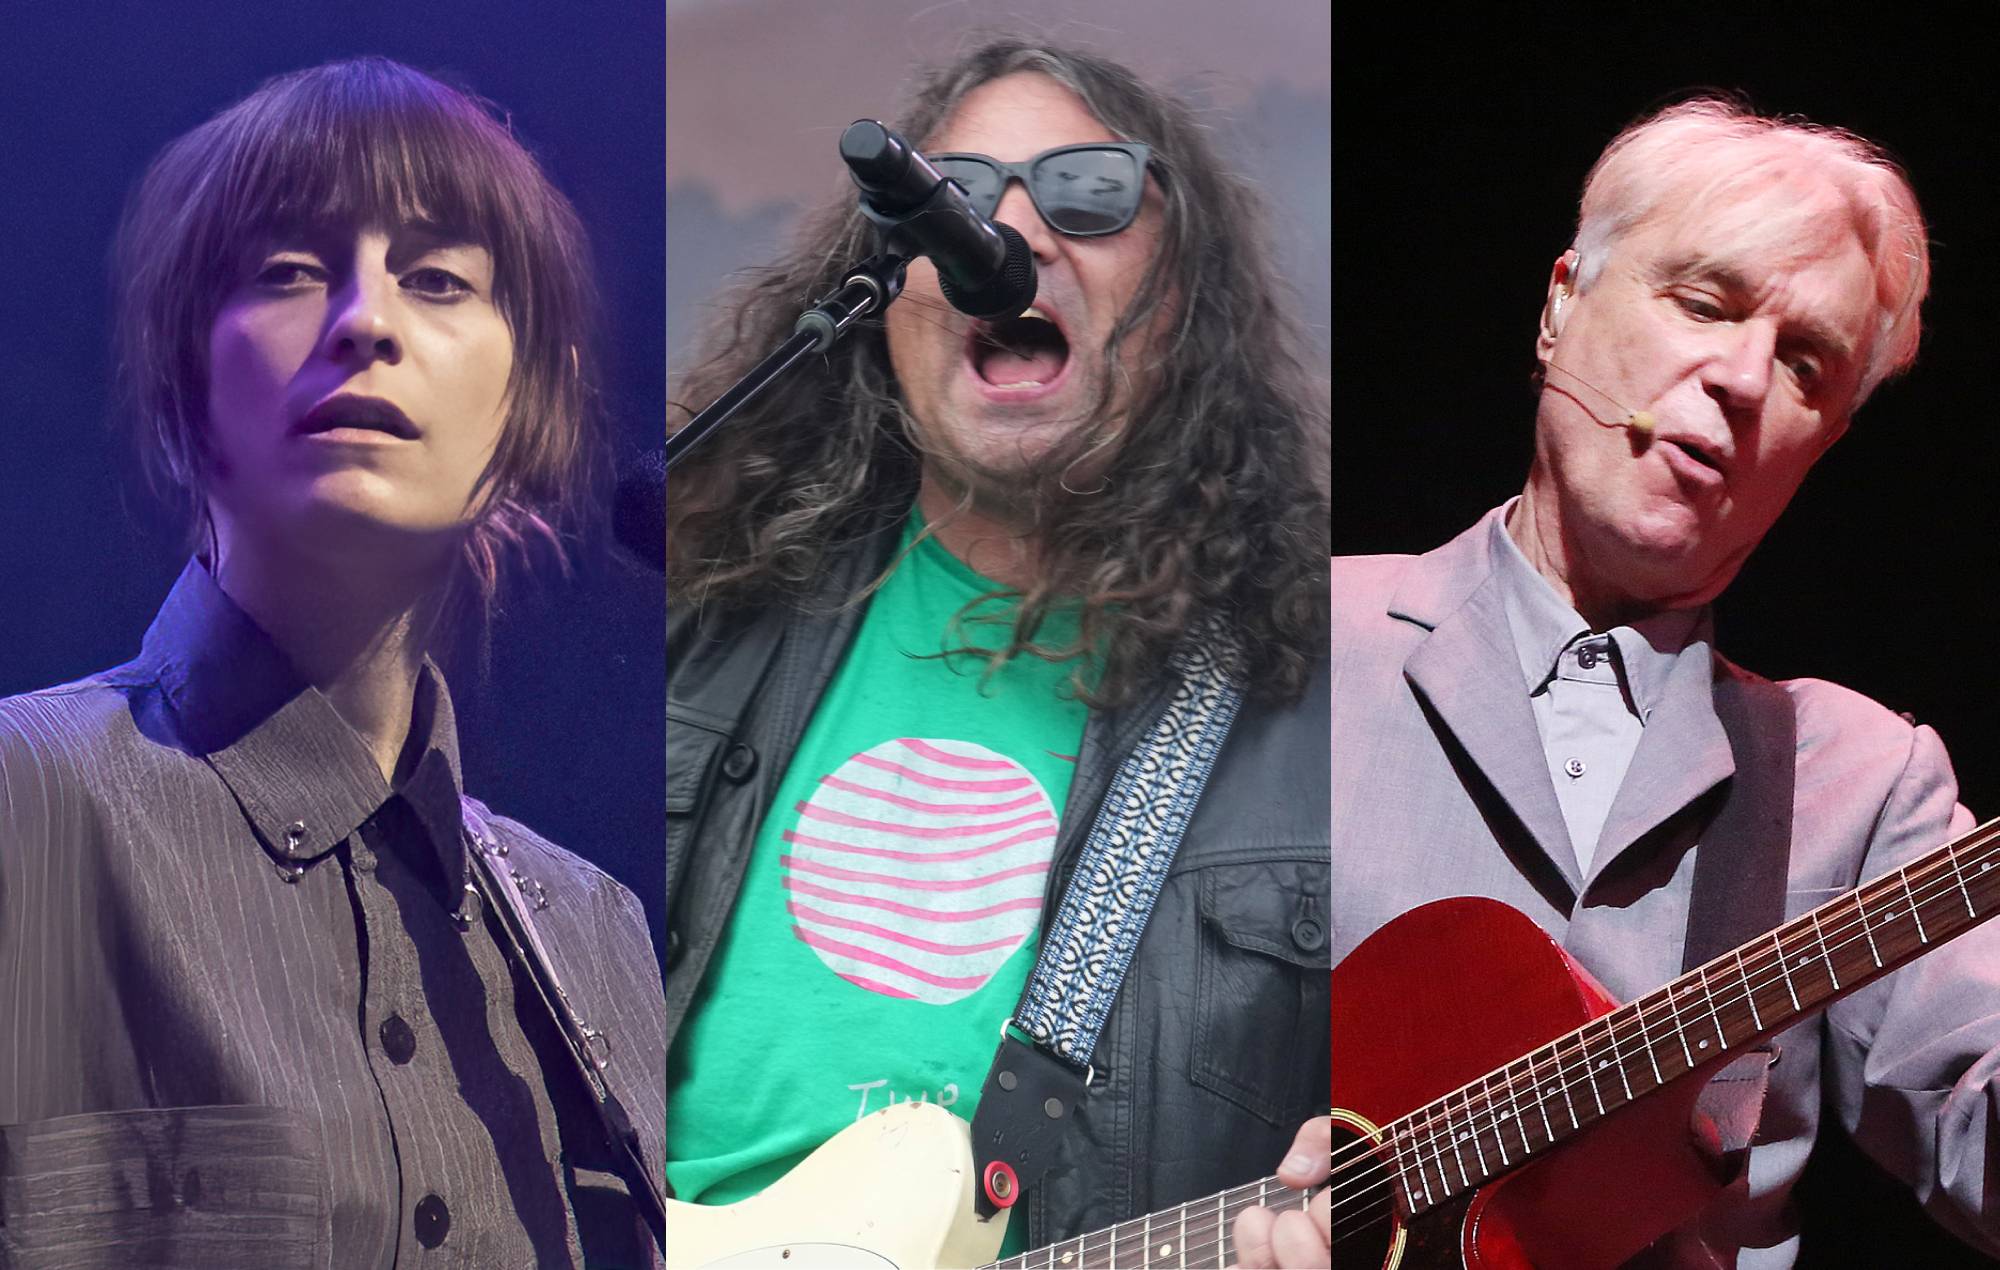 Faye Webster, The War on Drugs and David Byrne to appear on abortion access charity compilation